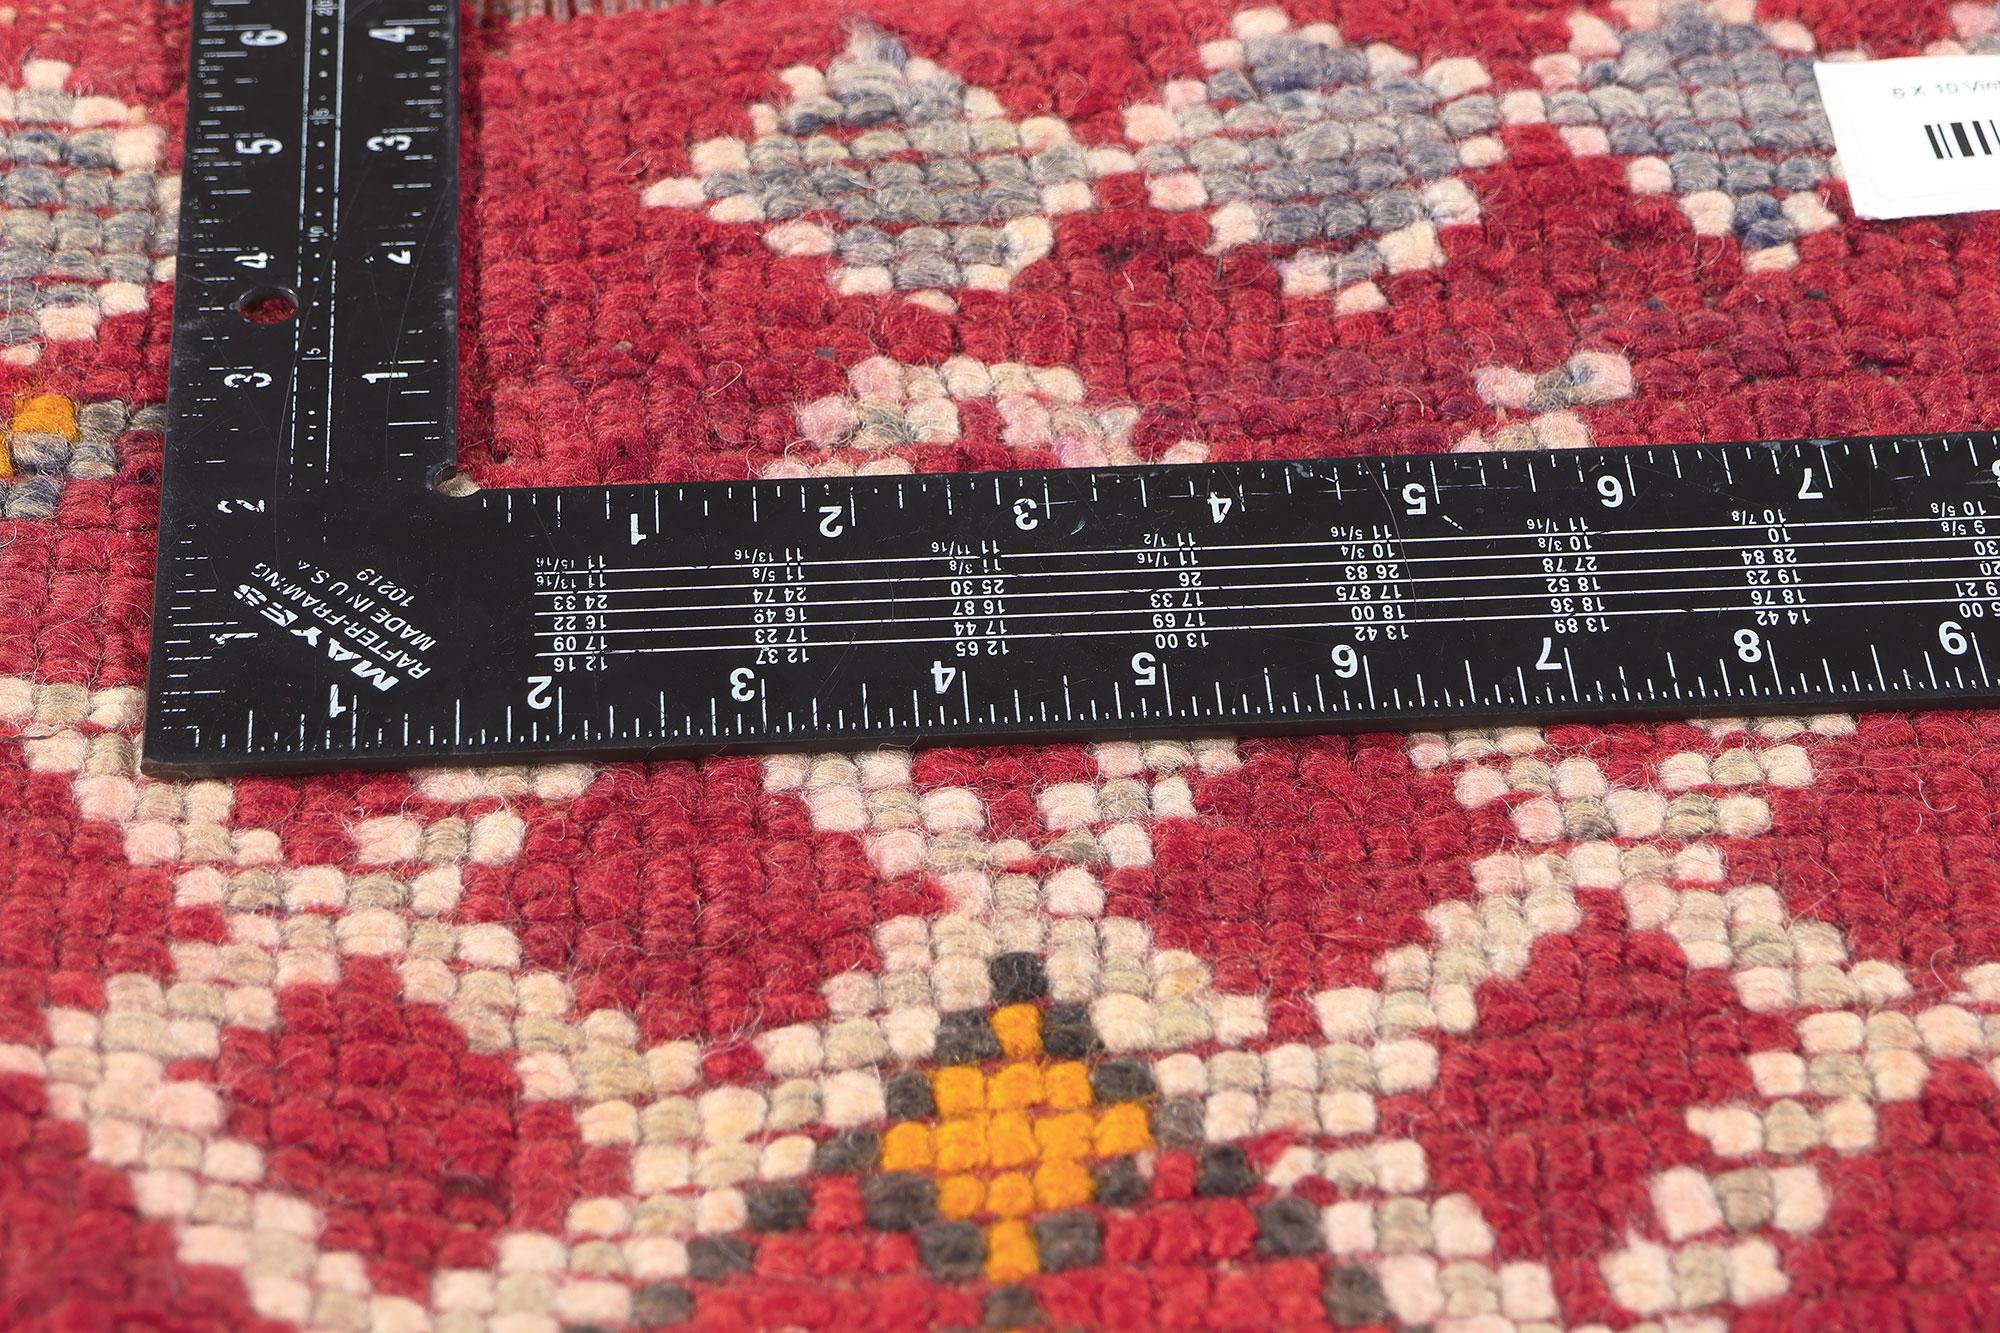 20th Century Vintage Beni MGuild Moroccan Rug, Midcentury Modern Meets Spicy Boho Chic For Sale